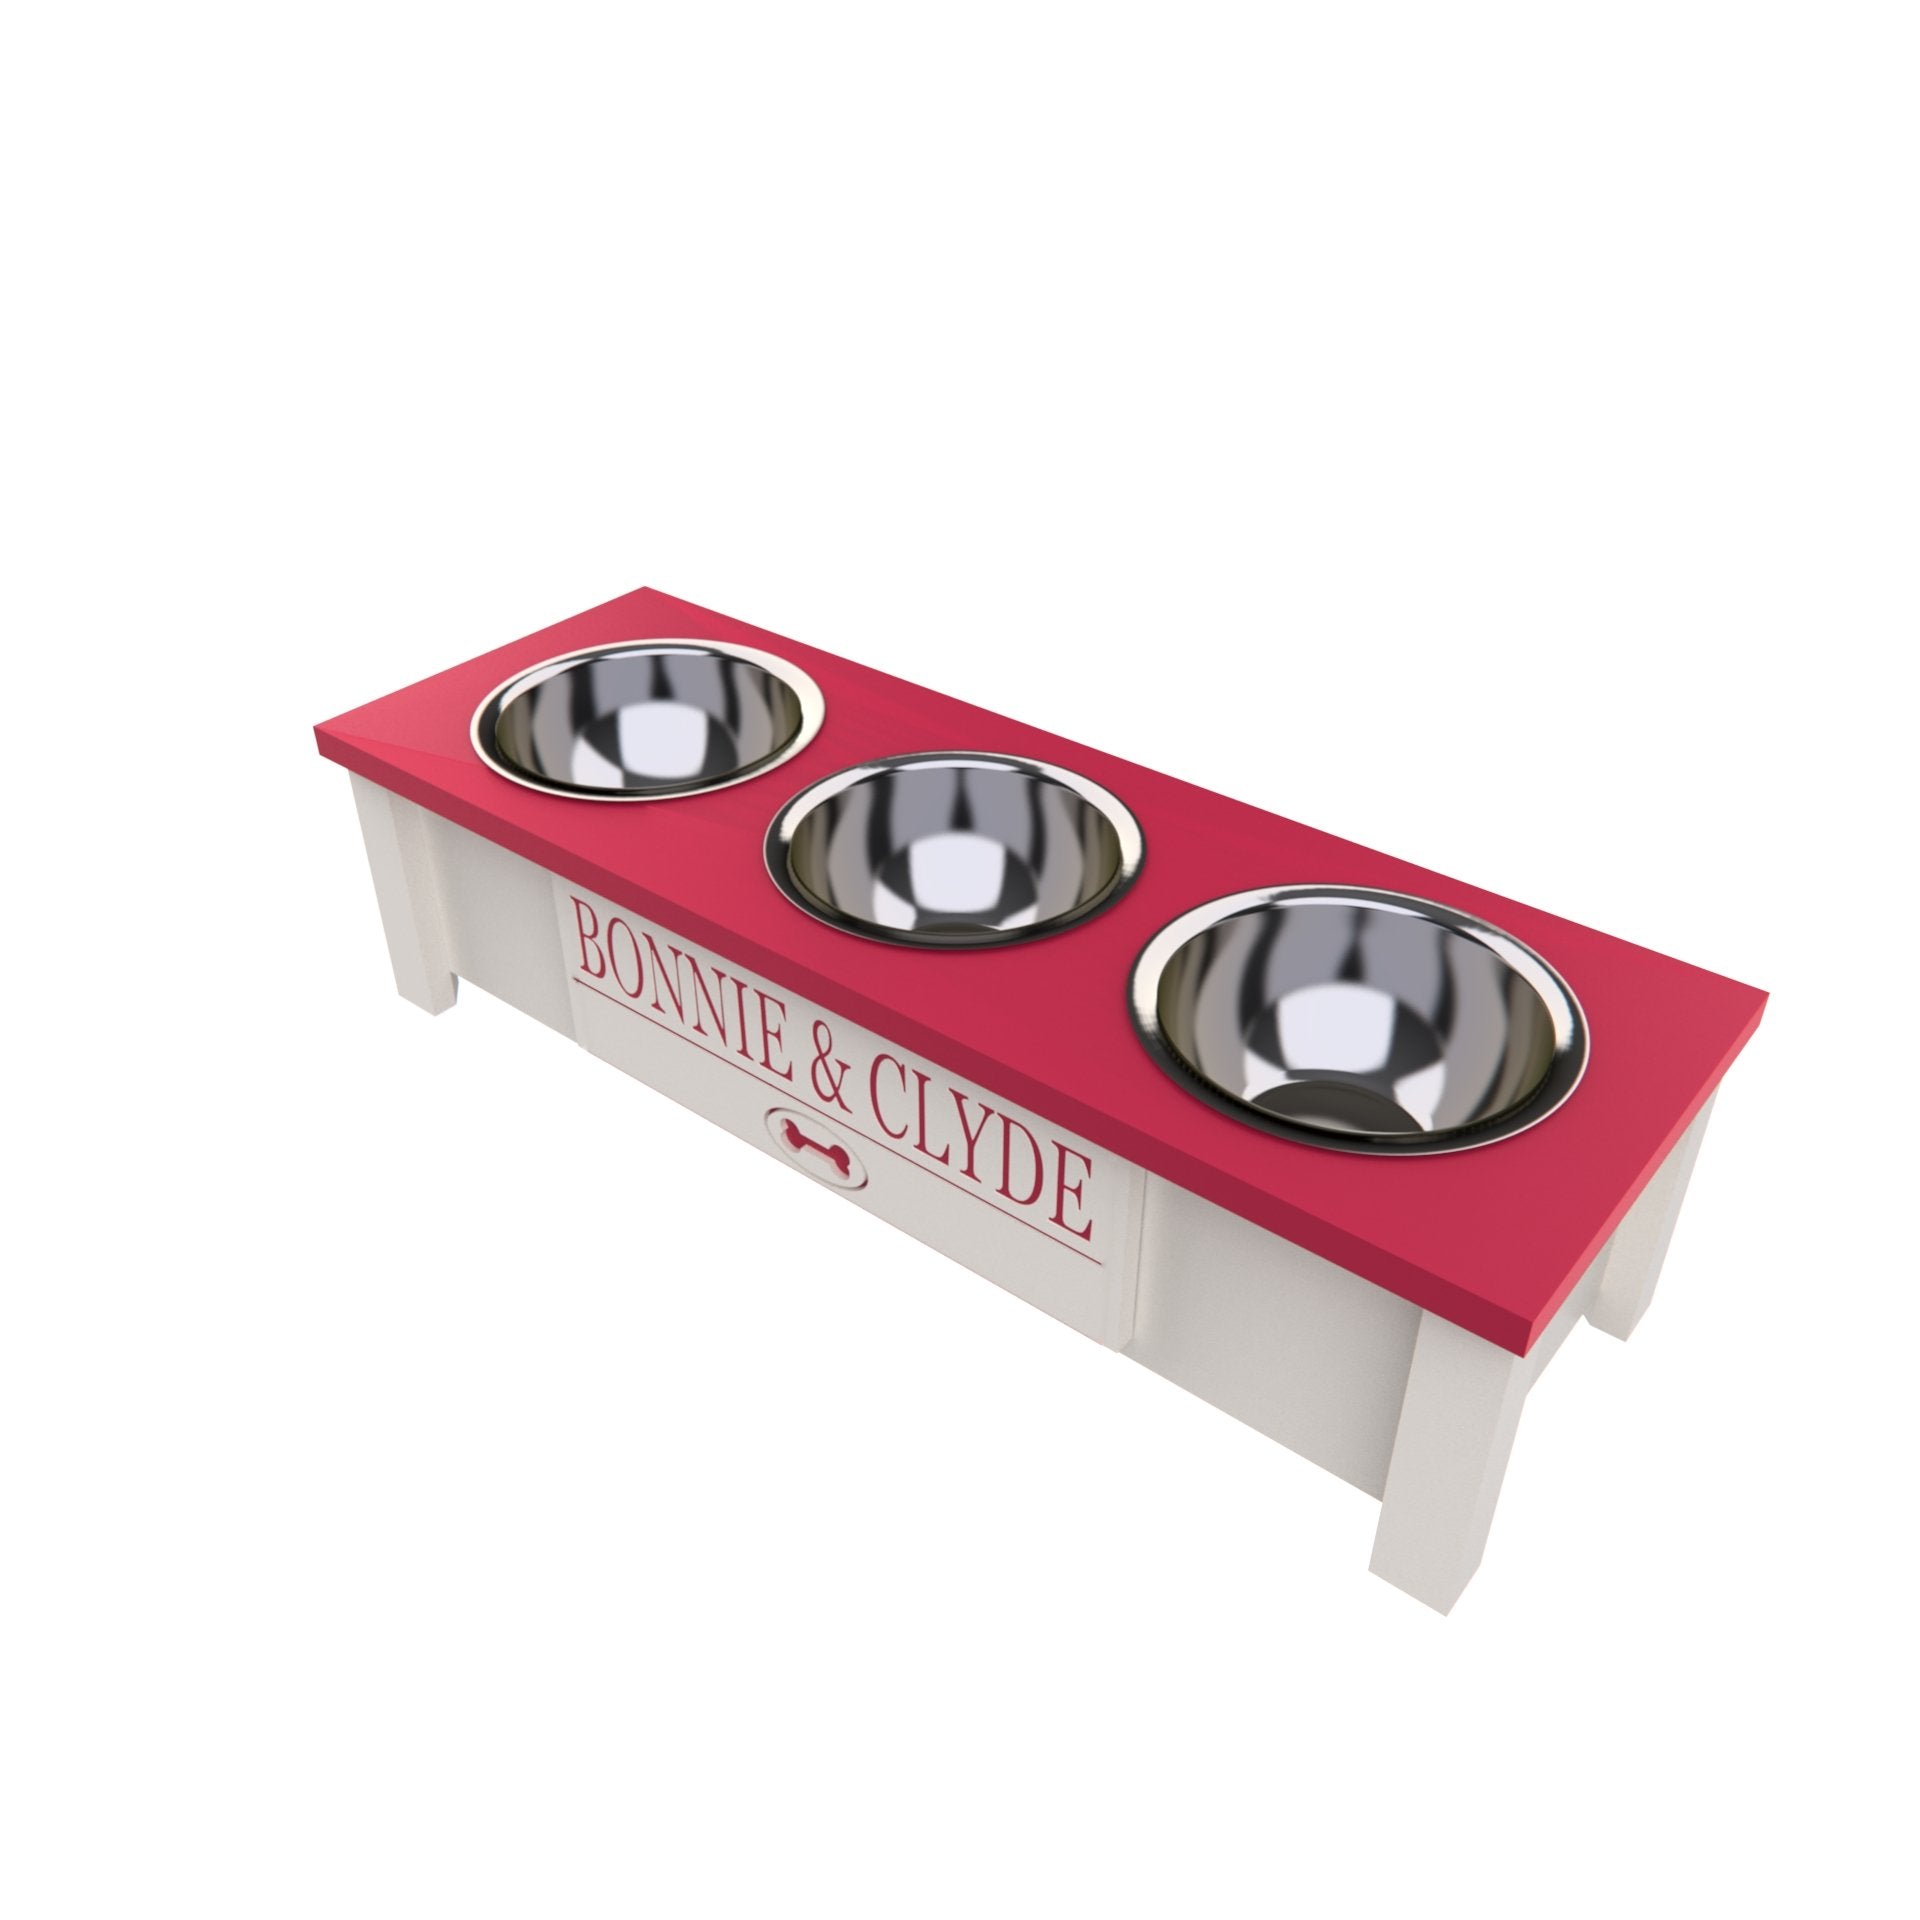 Personalized 3 Bowl Elevated Dog Feeder in Magenta - GrooveThis Woodshop - GT006MAG-S